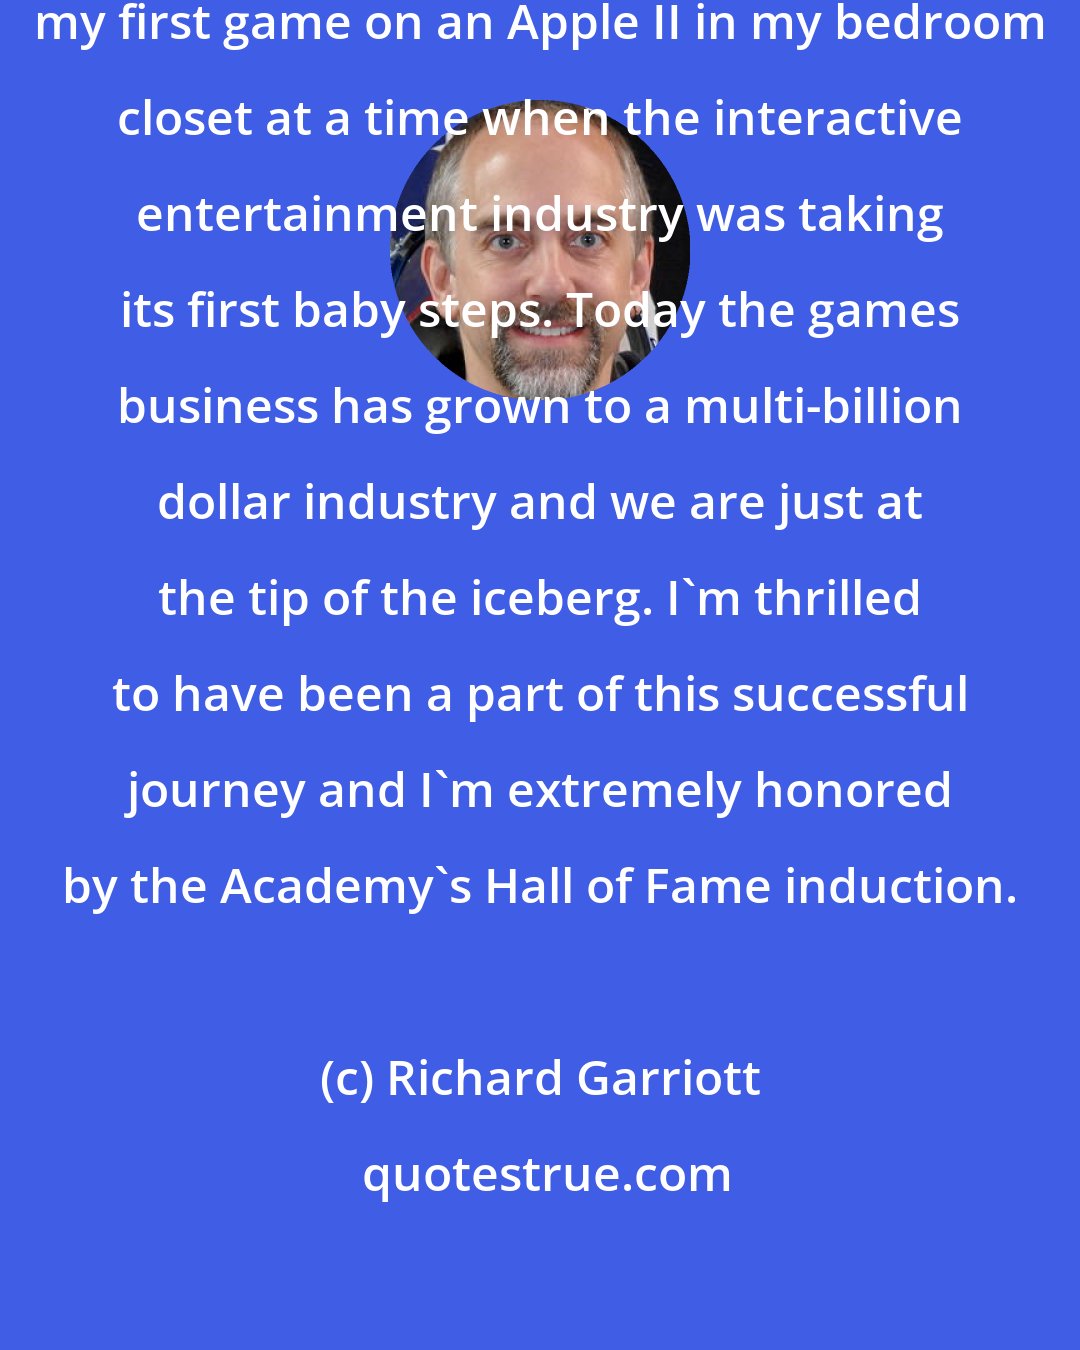 Richard Garriott: Twenty-eight years ago, I created my first game on an Apple II in my bedroom closet at a time when the interactive entertainment industry was taking its first baby steps. Today the games business has grown to a multi-billion dollar industry and we are just at the tip of the iceberg. I'm thrilled to have been a part of this successful journey and I'm extremely honored by the Academy's Hall of Fame induction.